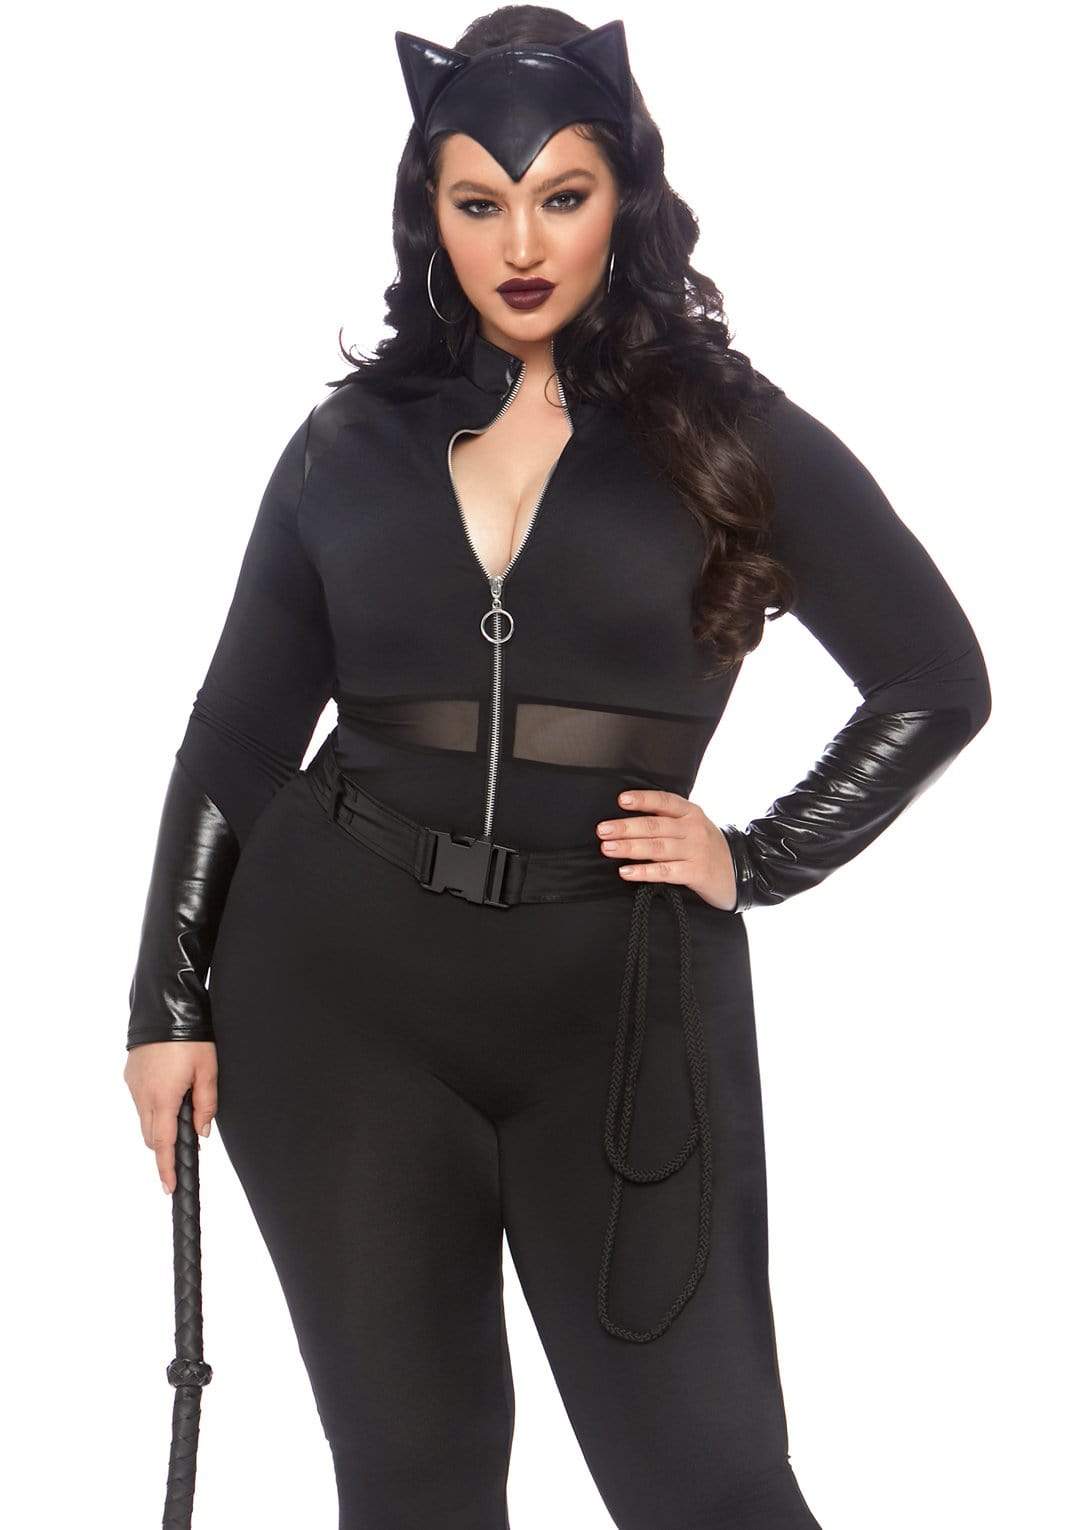 Plus Sultry Supervillain Costume, Sexy Plus Size Costumes